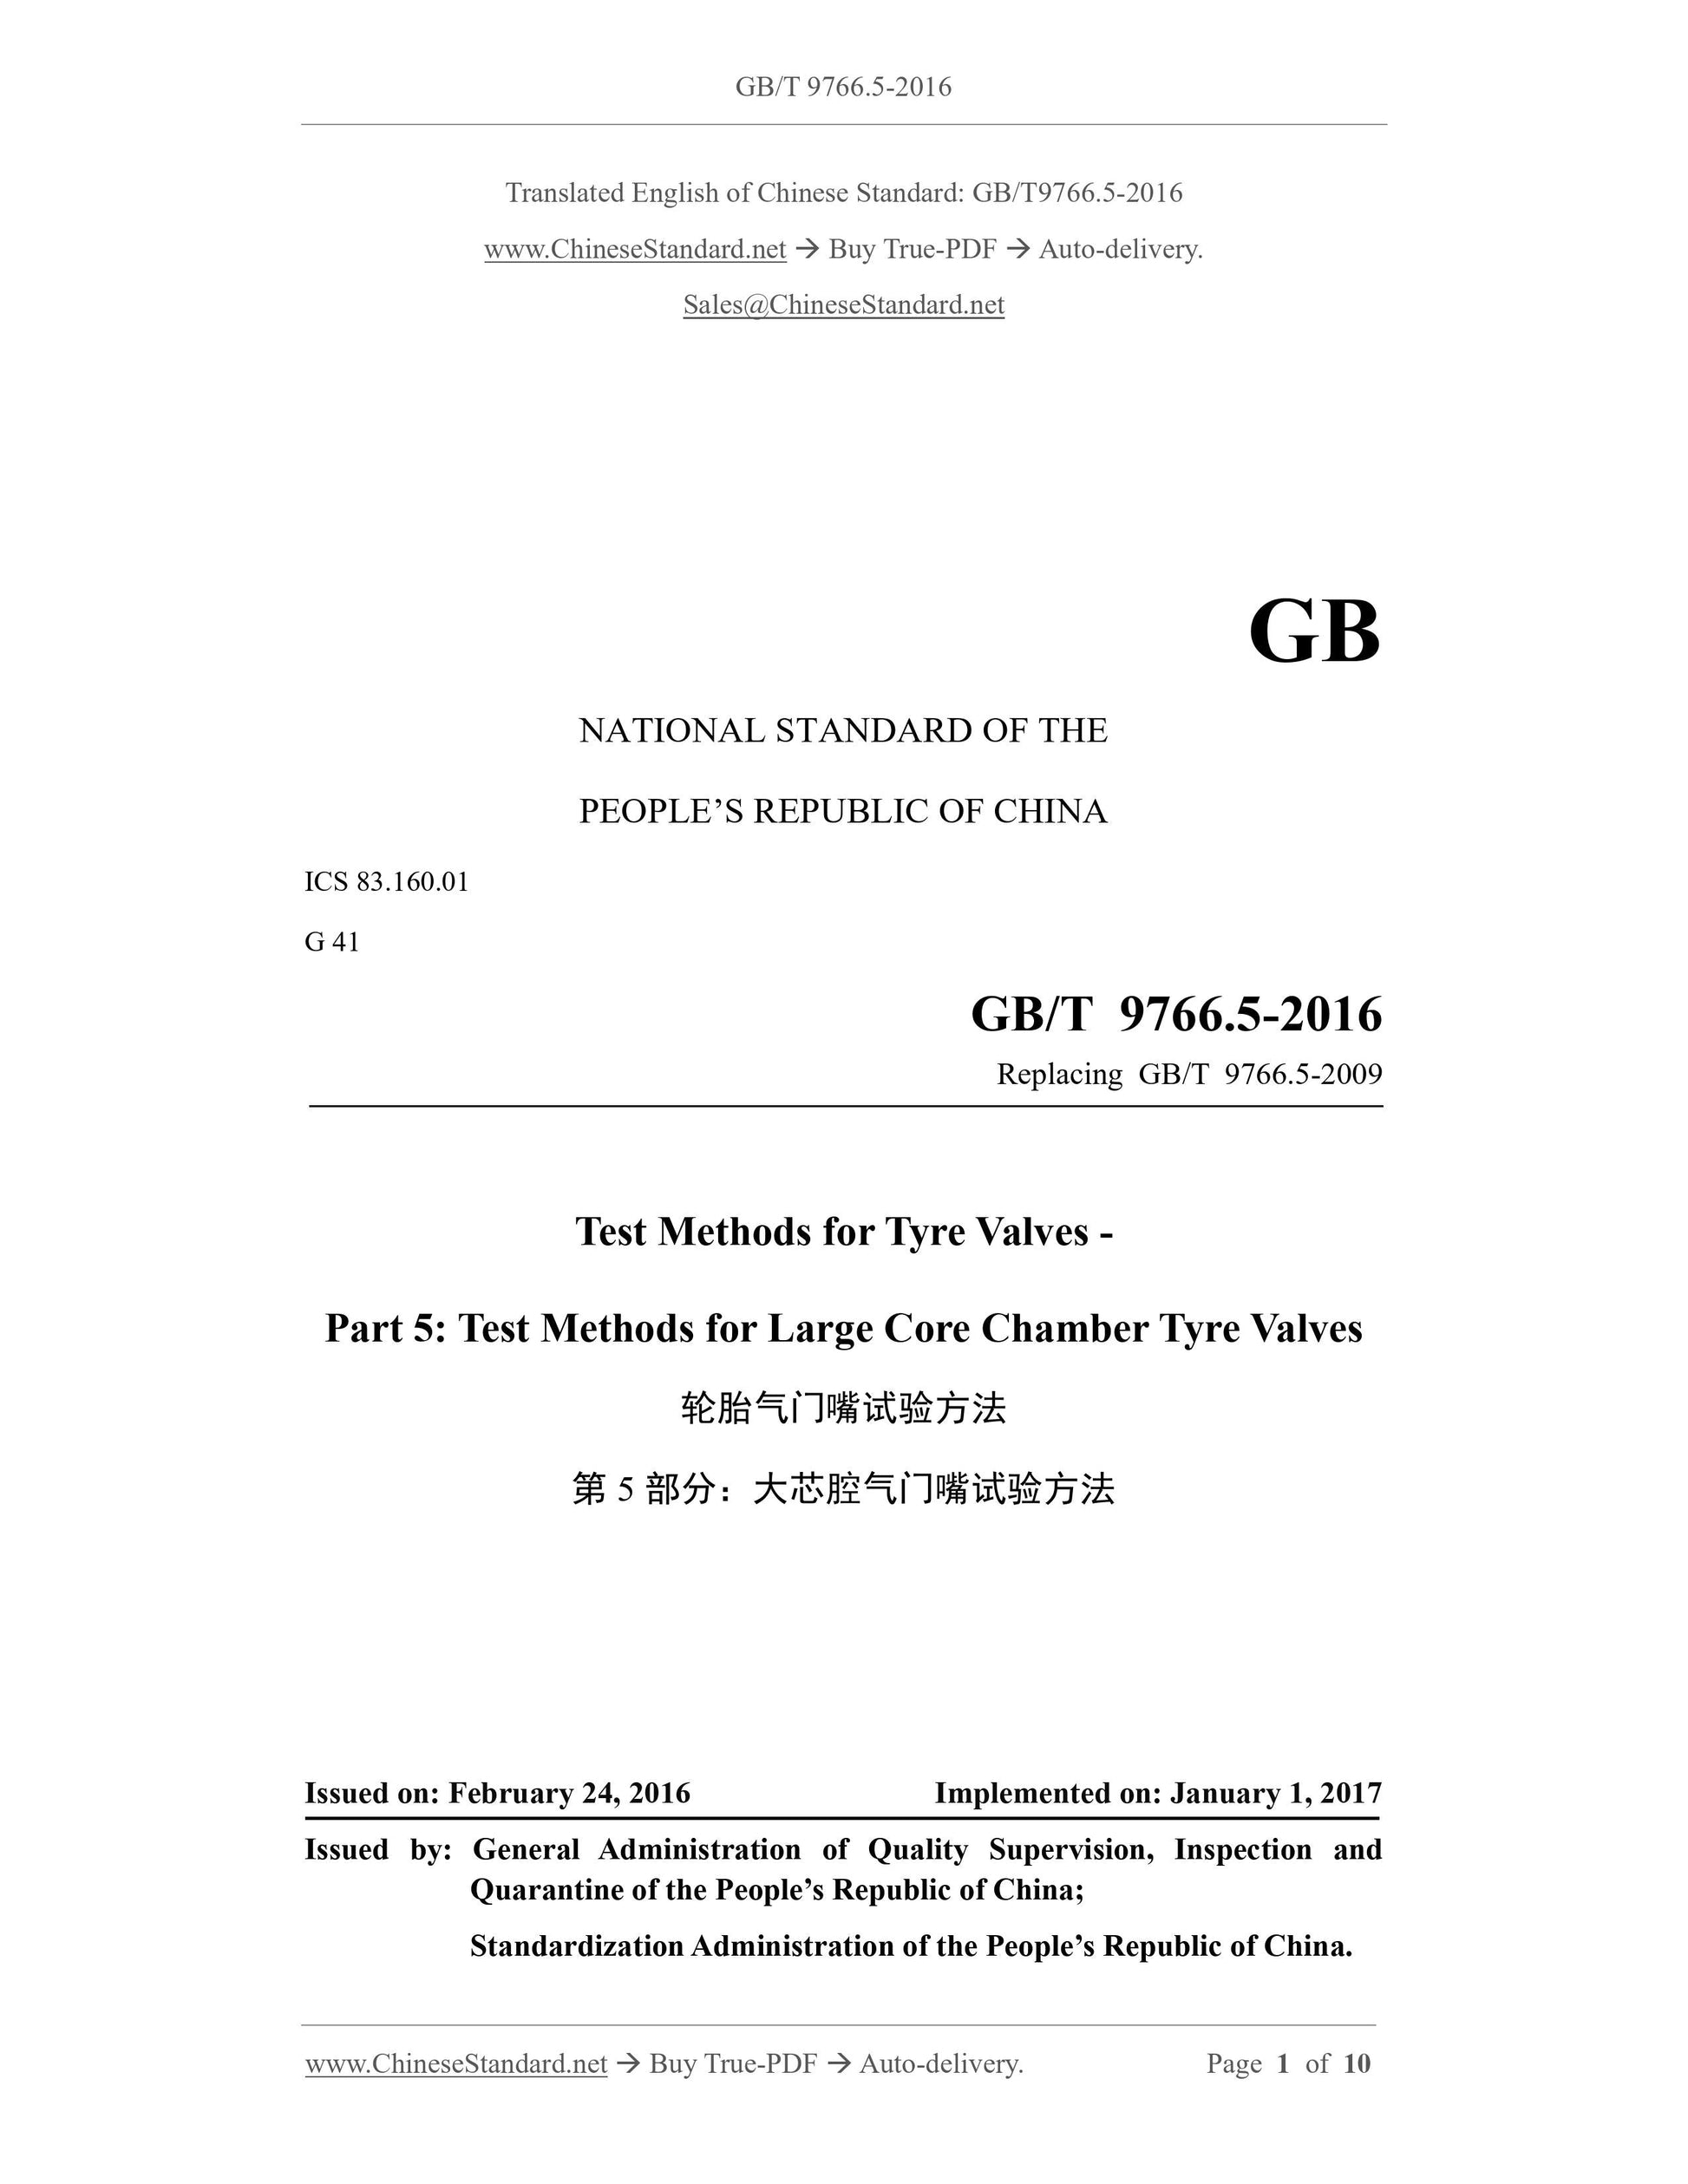 GB/T 9766.5-2016 Page 1